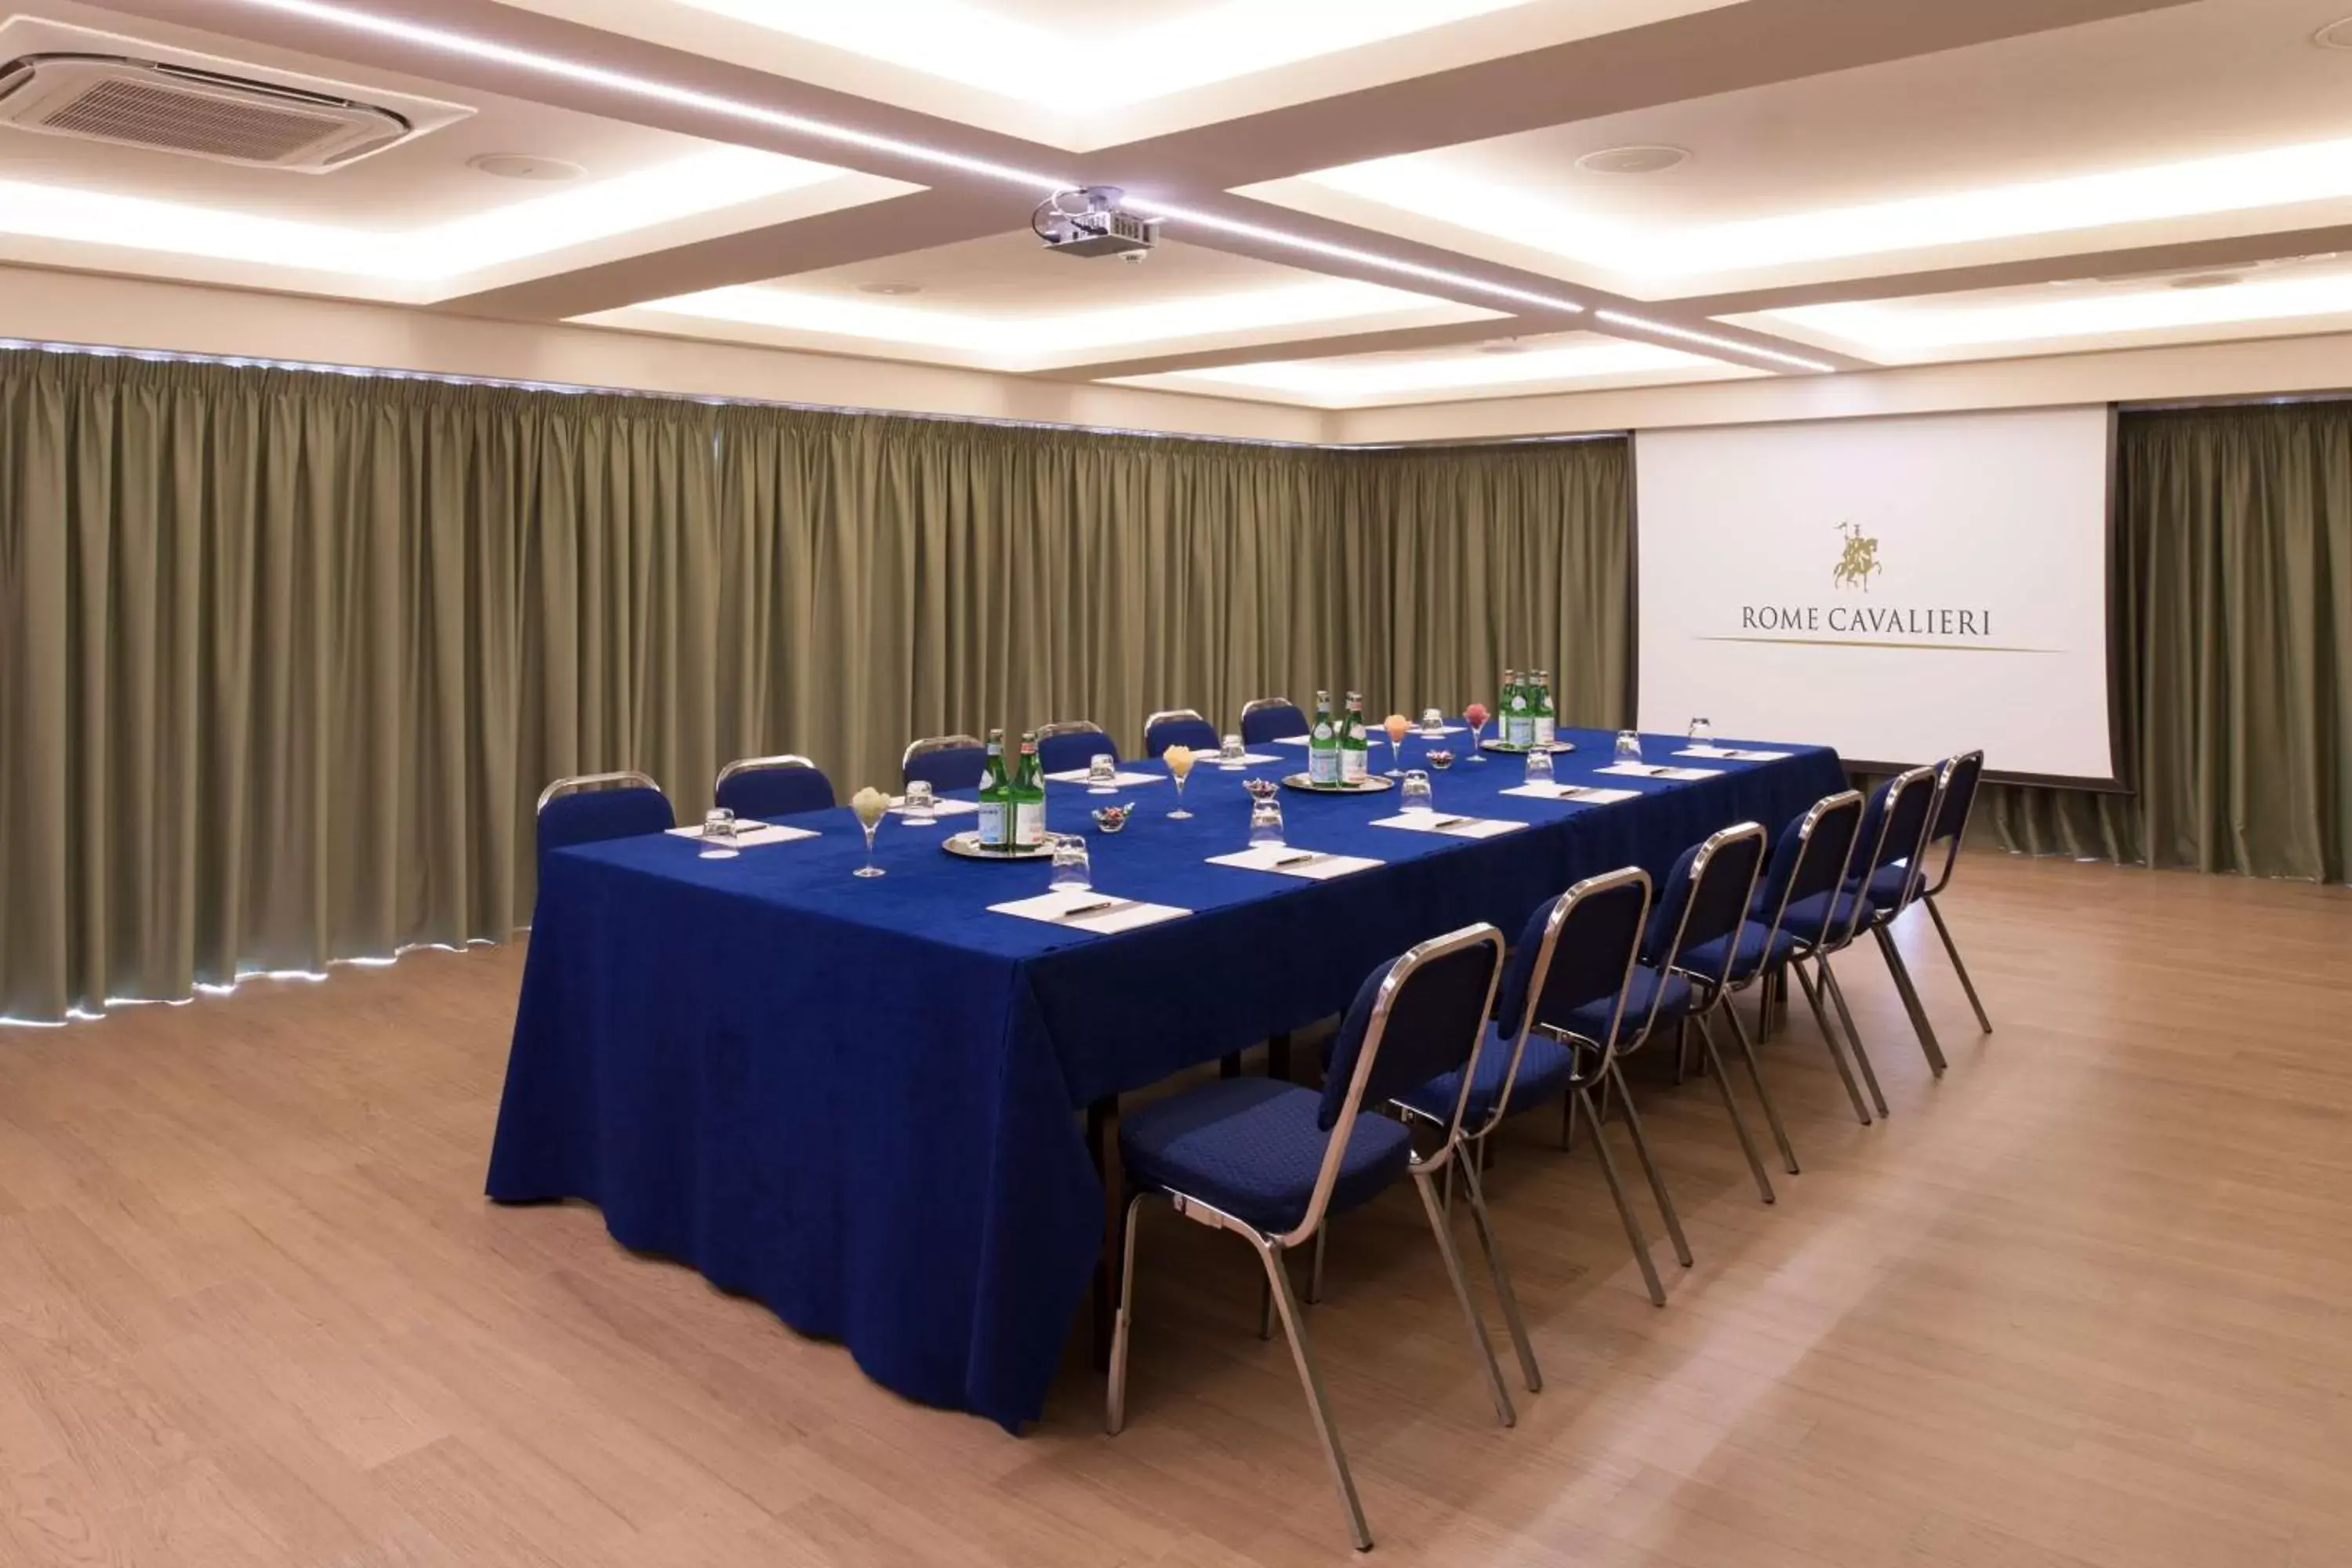 Meeting/conference room in Rome Cavalieri, A Waldorf Astoria Hotel